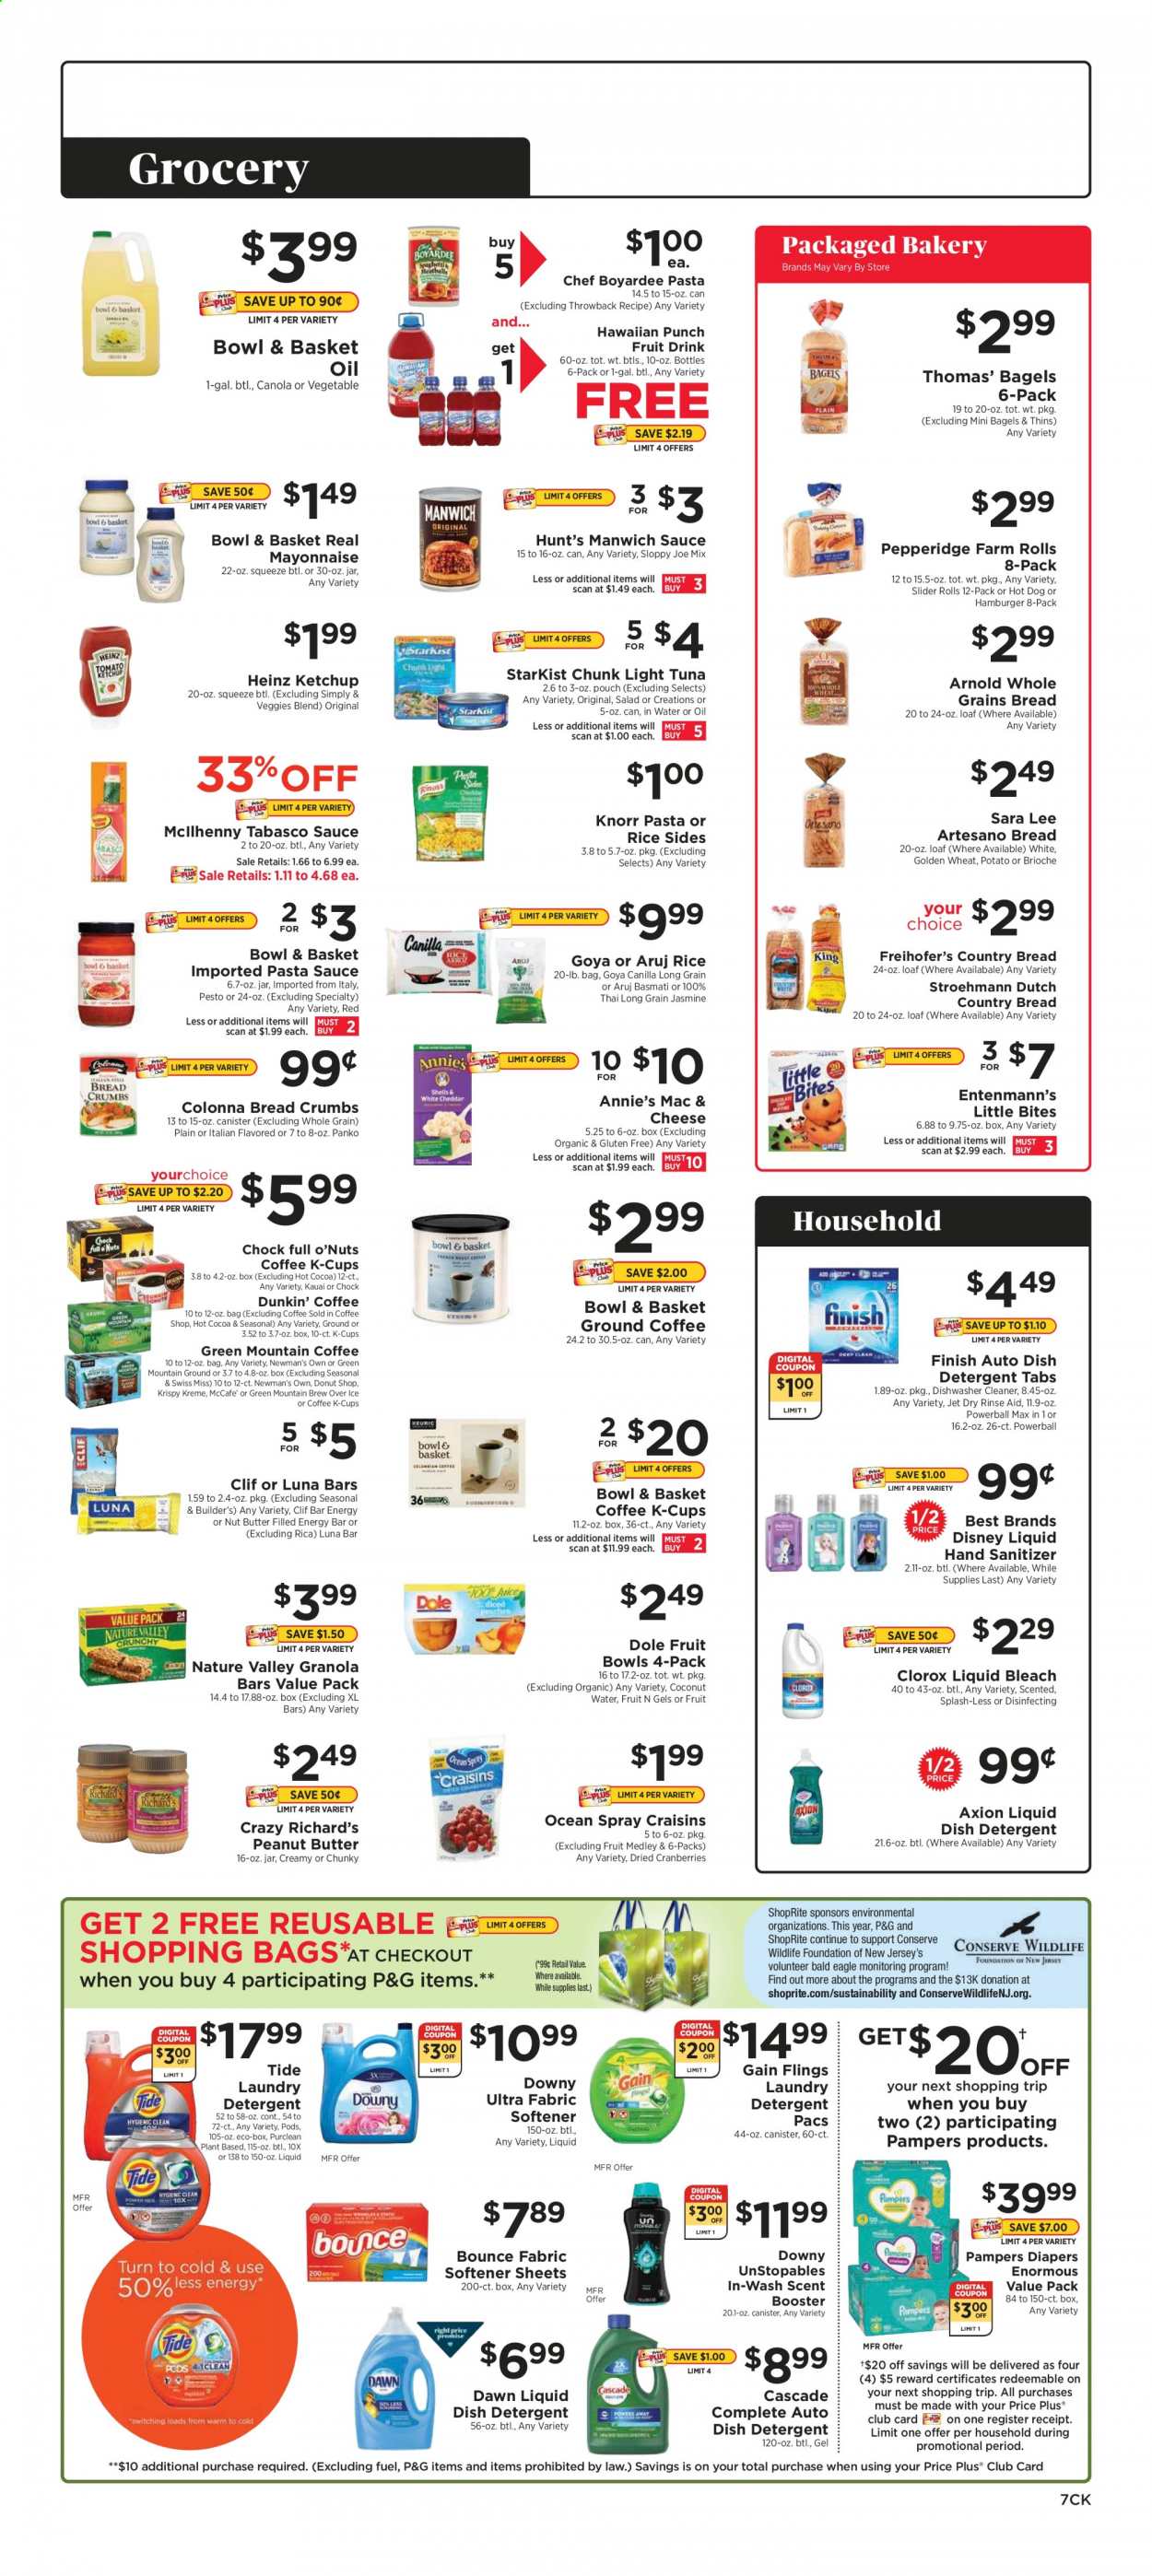 thumbnail - ShopRite Flyer - 04/04/2021 - 04/10/2021 - Sales products - brioche, Sara Lee, Bowl & Basket, bagels, Entenmann's, Little Bites, breadcrumbs, panko breadcrumbs, Dole, tuna, StarKist, macaroni & cheese, hot dog, pasta sauce, hamburger, Knorr, sauce, Annie's, mayonnaise, Swiss Miss, Thins, tabasco, craisins, Heinz, light tuna, Goya, Manwich, Chef Boyardee, granola bar, Nature Valley, basmati rice, rice, ketchup, pesto, oil, peanut butter, nut butter, dried fruit, fruit drink, hot cocoa, coffee, ground coffee, coffee capsules, McCafe, K-Cups, Green Mountain, Pampers, nappies, detergent, Gain, cleaner, Clorox, Cascade, Tide, Unstopables, fabric softener, bleach, laundry detergent, Bounce, dishwashing liquid, dishwasher cleaner, Jet, bowl. Page 7.